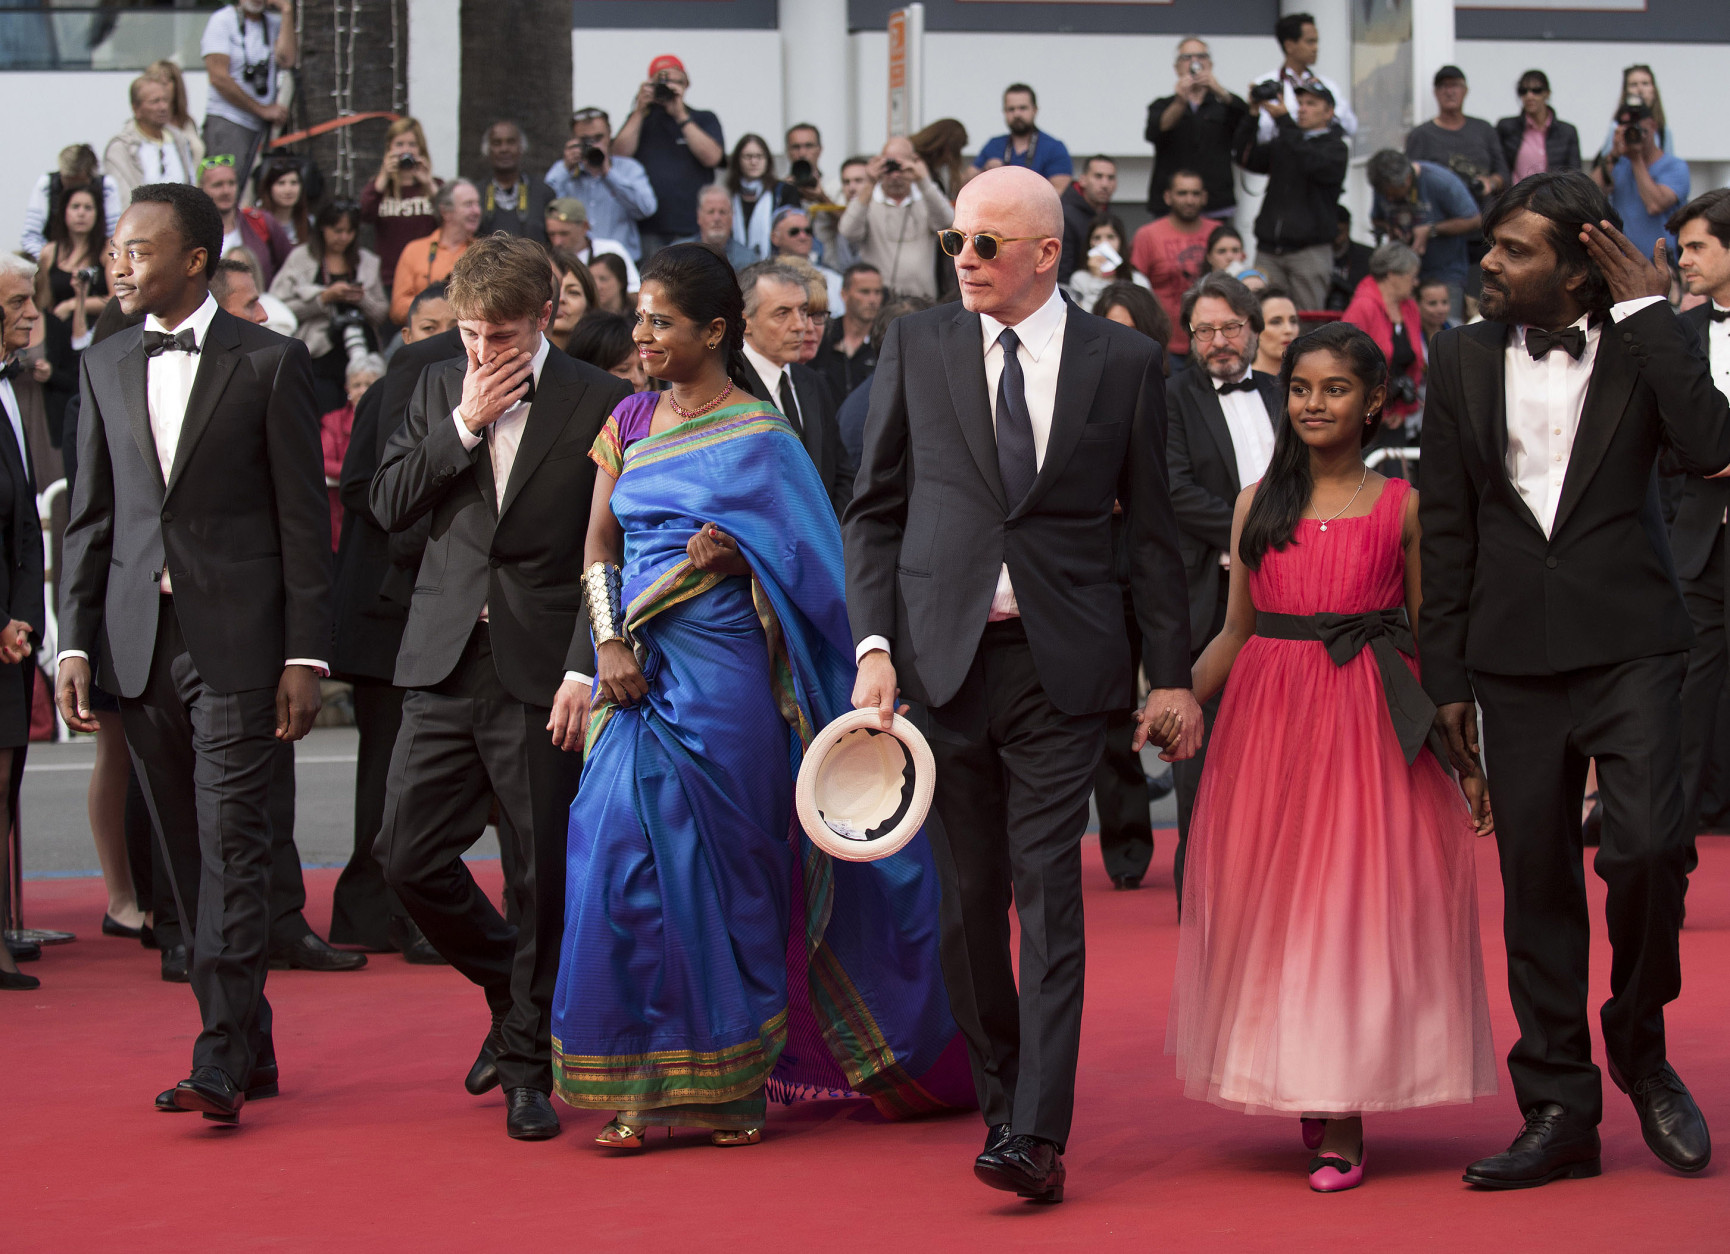 From left, Marc Zinga, Vincent Rottiers, Kalieaswari Srinivasan, director Jacques Audiard, Claudine Vinasithamby and Jesuthasan Antonythasan arrive for the screening of the film Dheepan at the 68th international film festival, Cannes, southern France, Thursday, May 21, 2015. (Photo by Arthur Mola/Invision/AP)